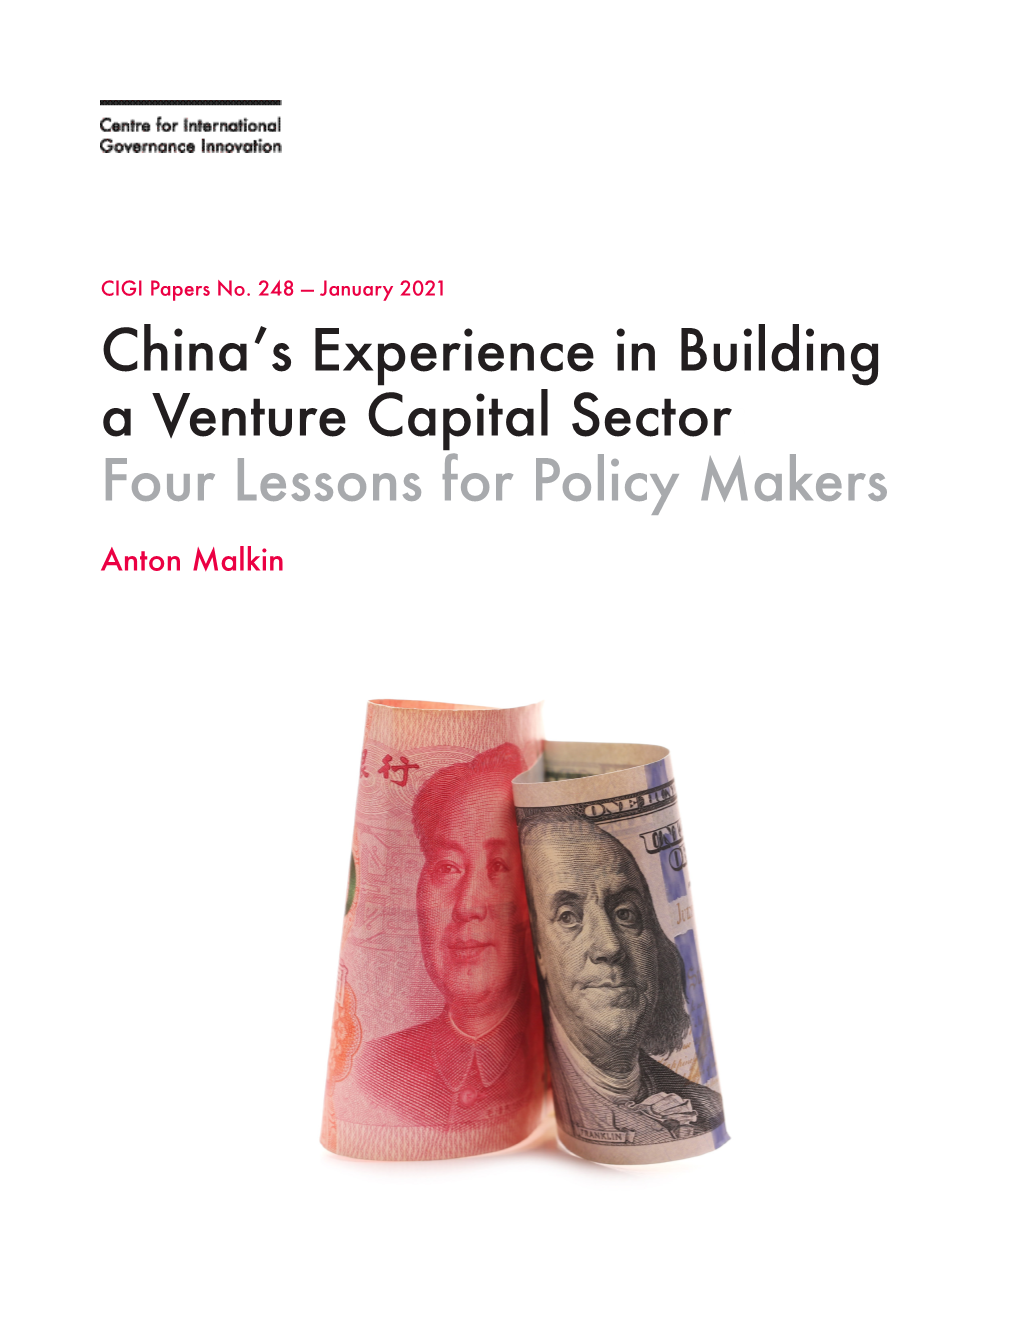 China's Experience in Building a Venture Capital Sector